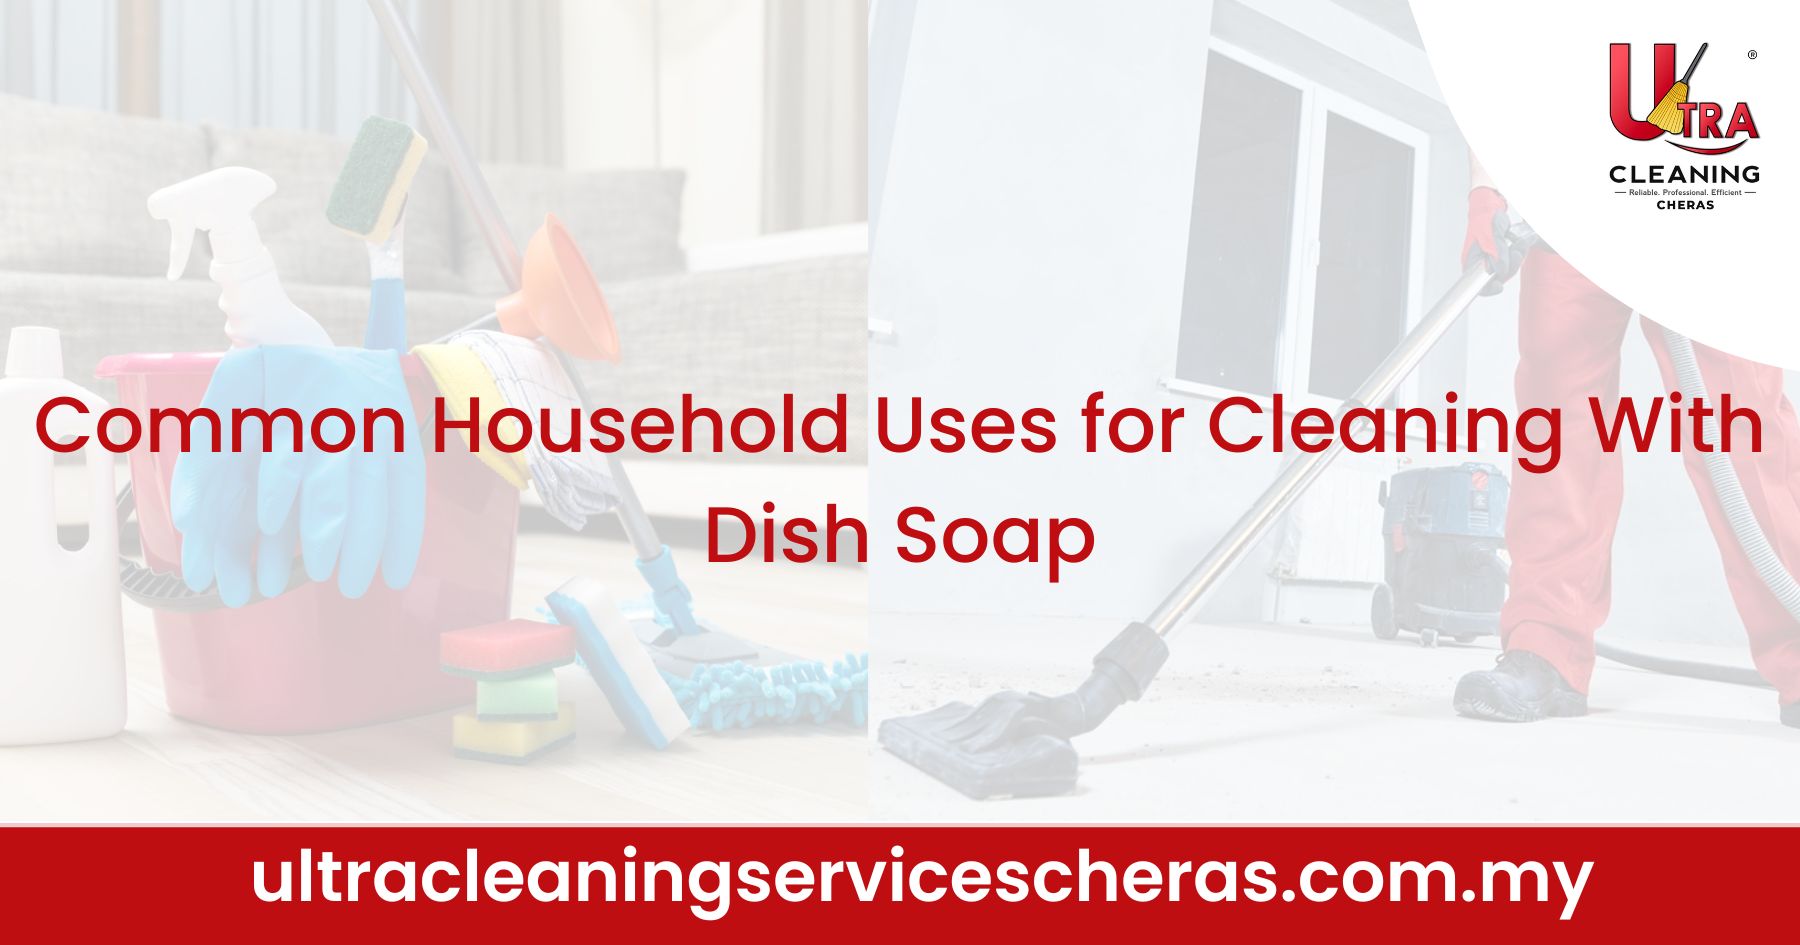 Common Household Uses for Cleaning With Dish Soap